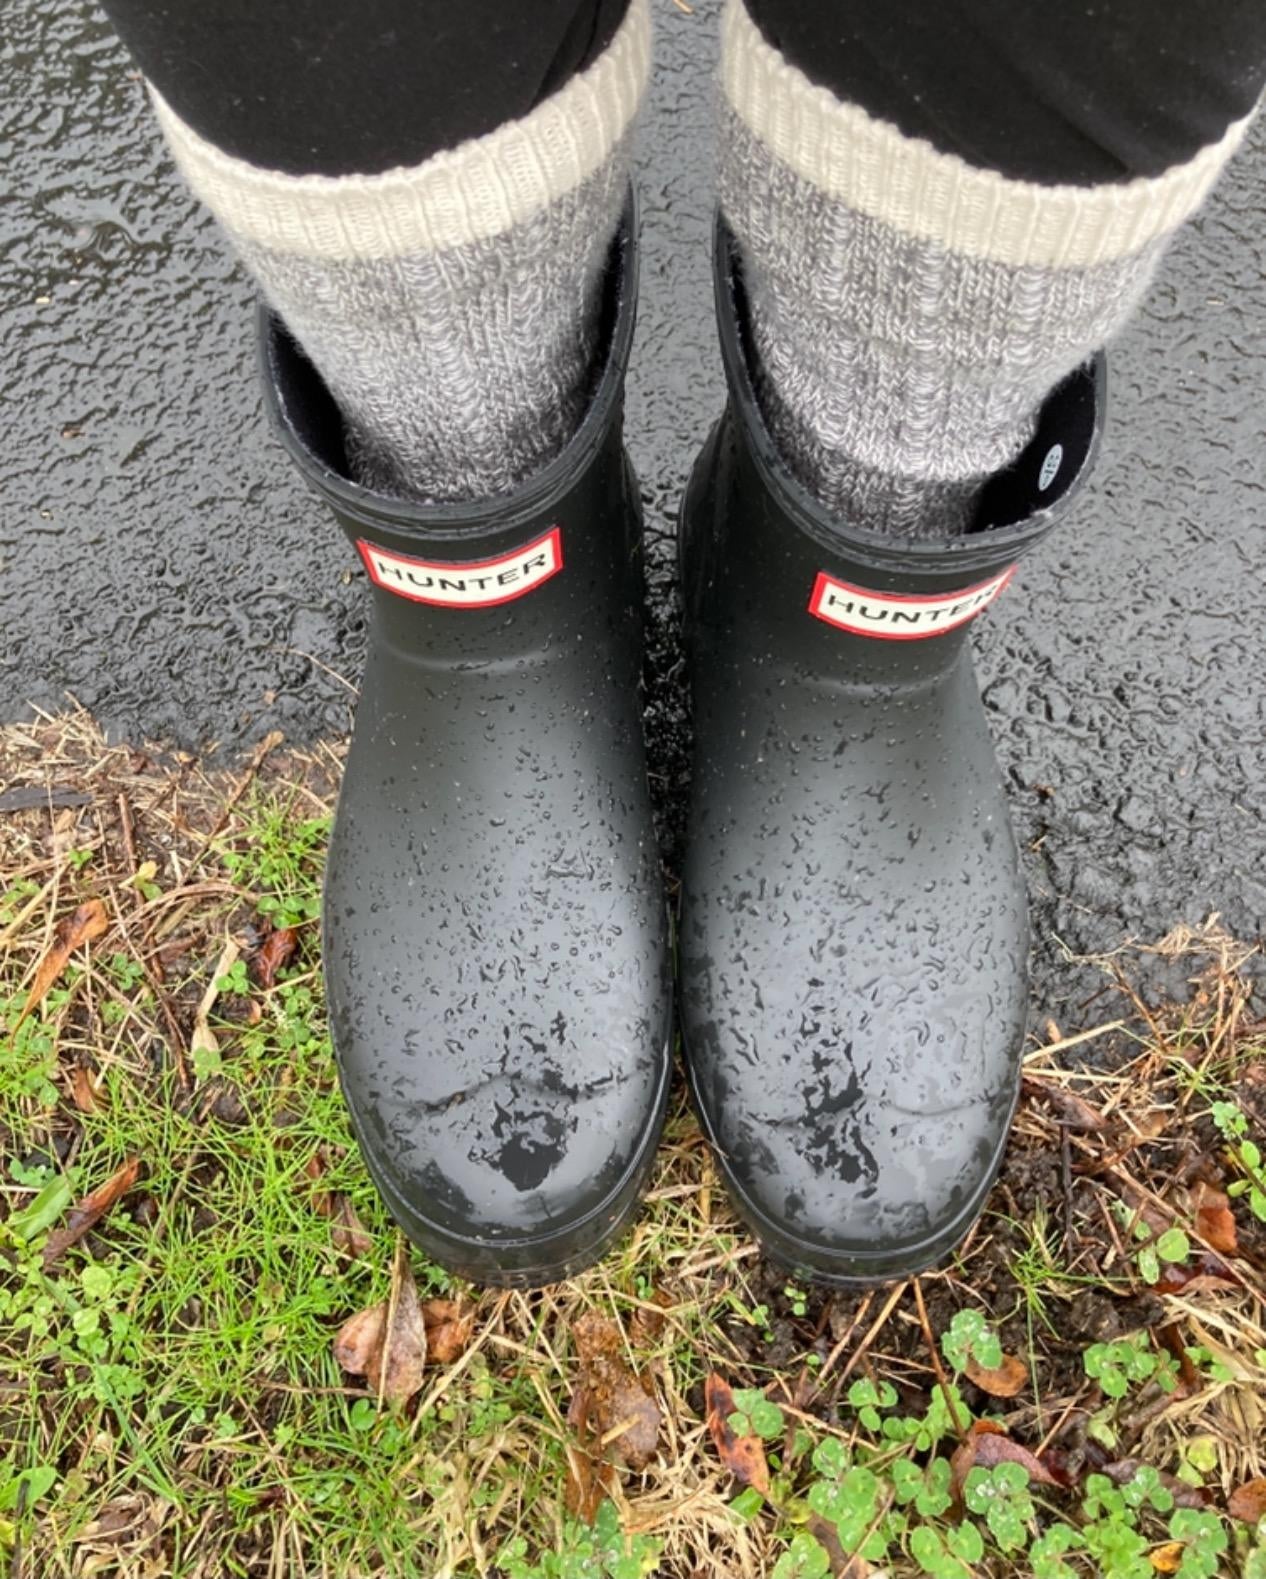 29 Best Rain Boots And Shoes That Keep Your Socks Dry